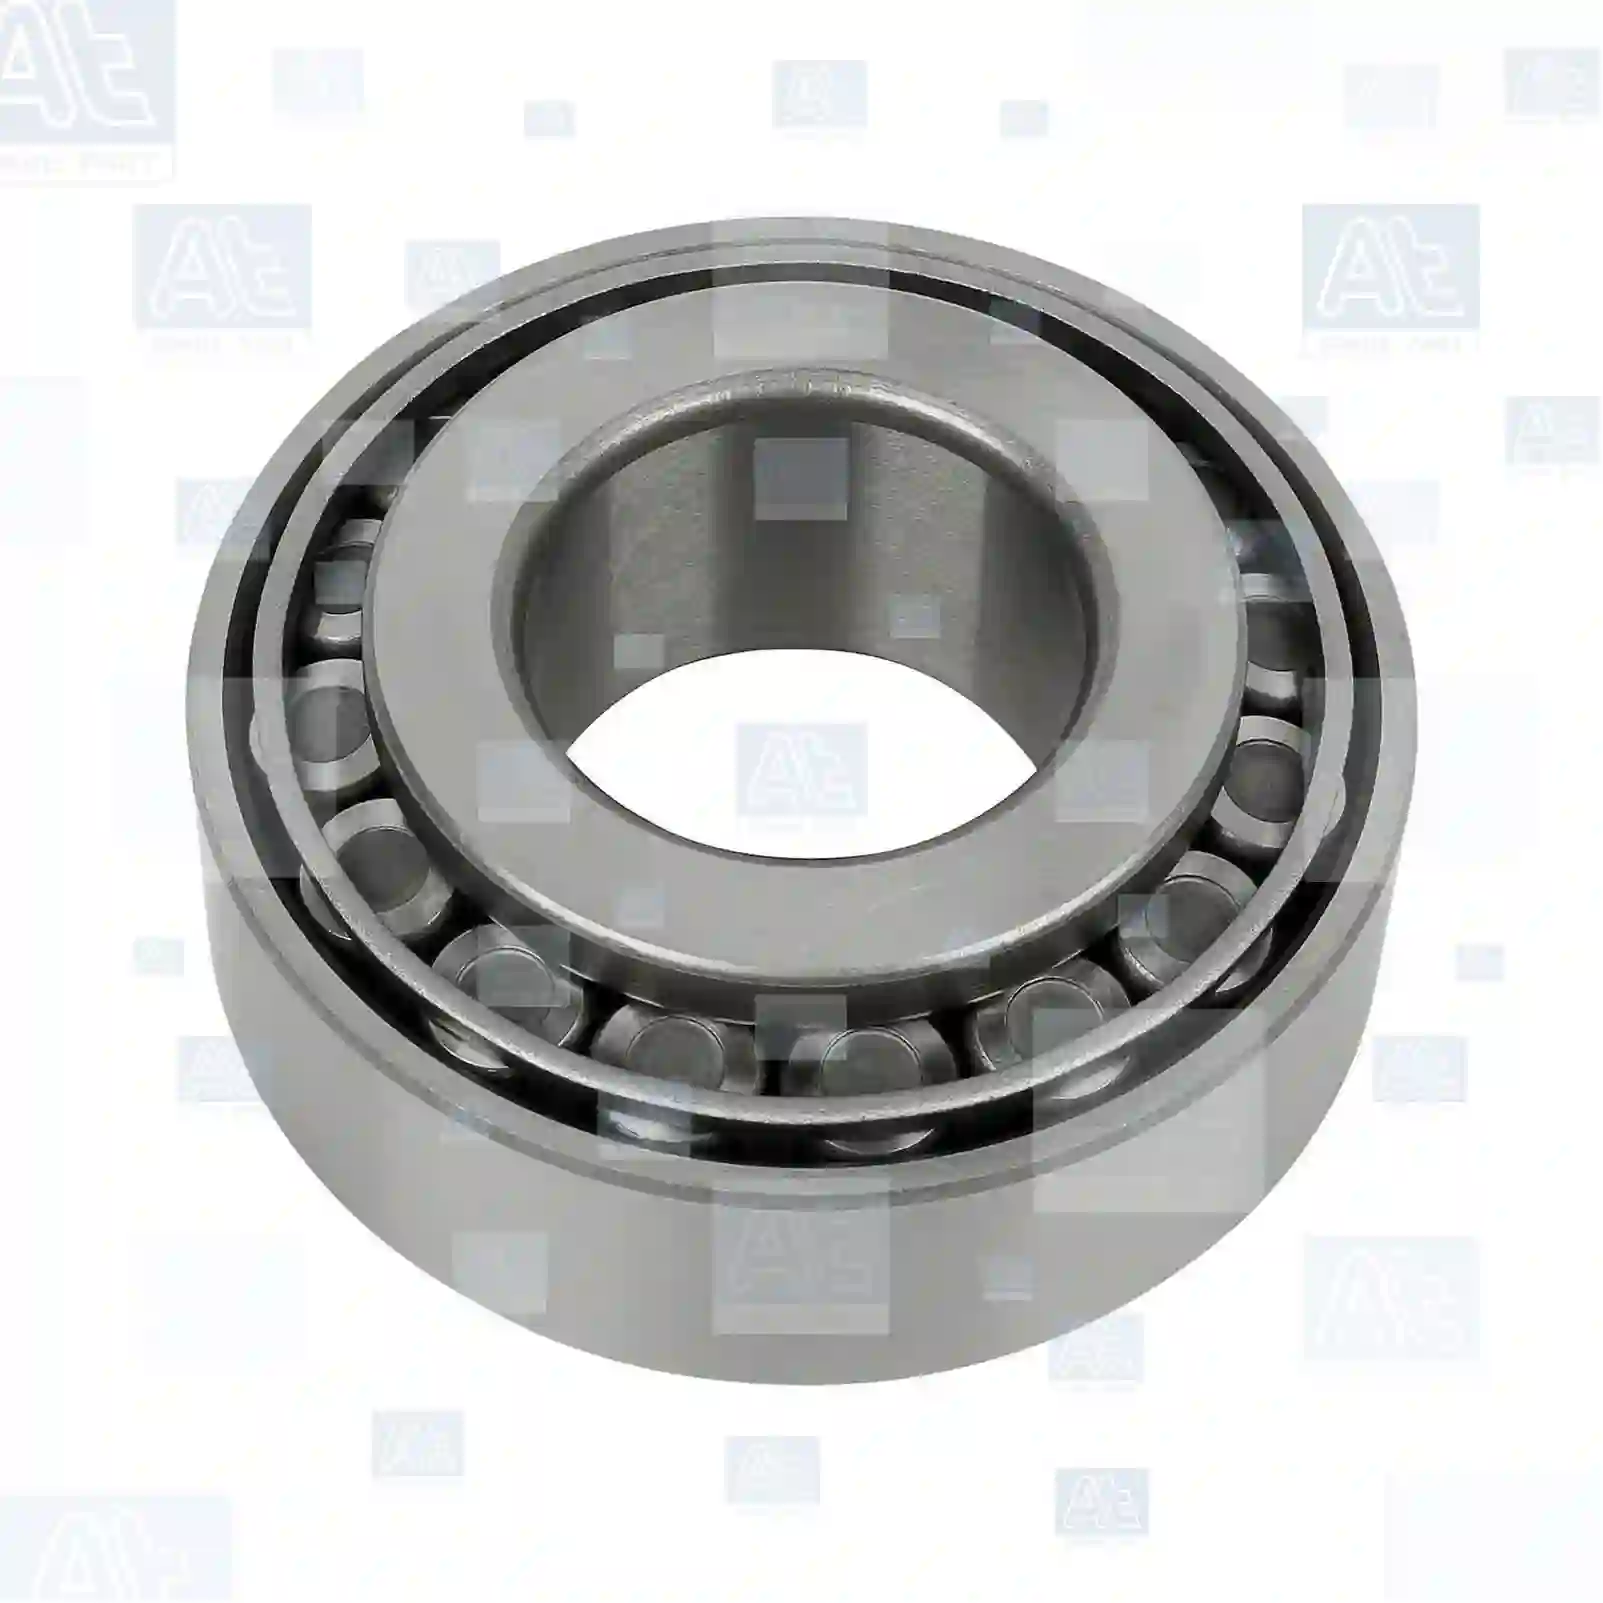 Tapered roller bearing, 77725196, 0264064500, 0140896, 0283684, 0283686, 140896, 283684, 283686, 0001442408X1, 000237070, 1442408, 1442408X1, 01110018, 01110019, 01110018, 01110019, 1110019, 26800590, 3612964500, 06324903100, 06324990013, 06324990133, 34934200003, 81934206051, 84934200023, A0023432848, A0857596000, 0049811305, MS556585, 0773230900, 0857596000, 0959532309, 3660704500, 4200003100, 1110018, 1362149, 14623, 397314, 6691168000, 11064, 1194652, ZG02977-0008 ||  77725196 At Spare Part | Engine, Accelerator Pedal, Camshaft, Connecting Rod, Crankcase, Crankshaft, Cylinder Head, Engine Suspension Mountings, Exhaust Manifold, Exhaust Gas Recirculation, Filter Kits, Flywheel Housing, General Overhaul Kits, Engine, Intake Manifold, Oil Cleaner, Oil Cooler, Oil Filter, Oil Pump, Oil Sump, Piston & Liner, Sensor & Switch, Timing Case, Turbocharger, Cooling System, Belt Tensioner, Coolant Filter, Coolant Pipe, Corrosion Prevention Agent, Drive, Expansion Tank, Fan, Intercooler, Monitors & Gauges, Radiator, Thermostat, V-Belt / Timing belt, Water Pump, Fuel System, Electronical Injector Unit, Feed Pump, Fuel Filter, cpl., Fuel Gauge Sender,  Fuel Line, Fuel Pump, Fuel Tank, Injection Line Kit, Injection Pump, Exhaust System, Clutch & Pedal, Gearbox, Propeller Shaft, Axles, Brake System, Hubs & Wheels, Suspension, Leaf Spring, Universal Parts / Accessories, Steering, Electrical System, Cabin Tapered roller bearing, 77725196, 0264064500, 0140896, 0283684, 0283686, 140896, 283684, 283686, 0001442408X1, 000237070, 1442408, 1442408X1, 01110018, 01110019, 01110018, 01110019, 1110019, 26800590, 3612964500, 06324903100, 06324990013, 06324990133, 34934200003, 81934206051, 84934200023, A0023432848, A0857596000, 0049811305, MS556585, 0773230900, 0857596000, 0959532309, 3660704500, 4200003100, 1110018, 1362149, 14623, 397314, 6691168000, 11064, 1194652, ZG02977-0008 ||  77725196 At Spare Part | Engine, Accelerator Pedal, Camshaft, Connecting Rod, Crankcase, Crankshaft, Cylinder Head, Engine Suspension Mountings, Exhaust Manifold, Exhaust Gas Recirculation, Filter Kits, Flywheel Housing, General Overhaul Kits, Engine, Intake Manifold, Oil Cleaner, Oil Cooler, Oil Filter, Oil Pump, Oil Sump, Piston & Liner, Sensor & Switch, Timing Case, Turbocharger, Cooling System, Belt Tensioner, Coolant Filter, Coolant Pipe, Corrosion Prevention Agent, Drive, Expansion Tank, Fan, Intercooler, Monitors & Gauges, Radiator, Thermostat, V-Belt / Timing belt, Water Pump, Fuel System, Electronical Injector Unit, Feed Pump, Fuel Filter, cpl., Fuel Gauge Sender,  Fuel Line, Fuel Pump, Fuel Tank, Injection Line Kit, Injection Pump, Exhaust System, Clutch & Pedal, Gearbox, Propeller Shaft, Axles, Brake System, Hubs & Wheels, Suspension, Leaf Spring, Universal Parts / Accessories, Steering, Electrical System, Cabin